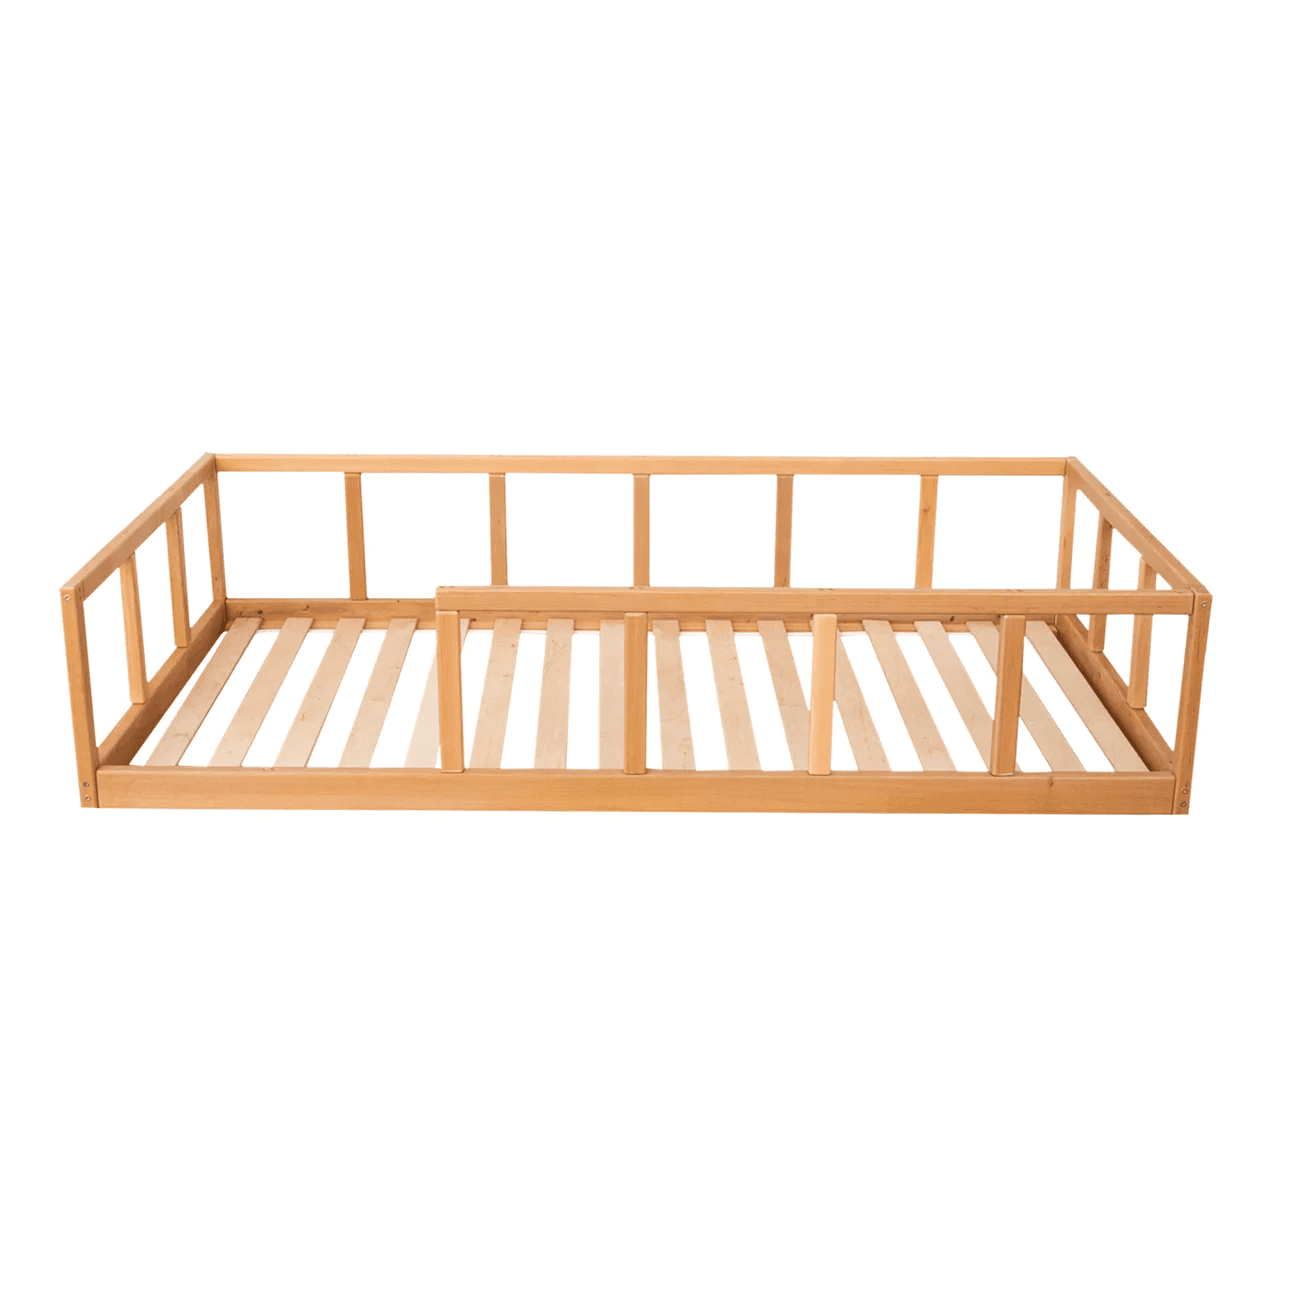 Montessori Busy Wood Montessori Floor Bed With Rails and Slats Model 10 Full Size